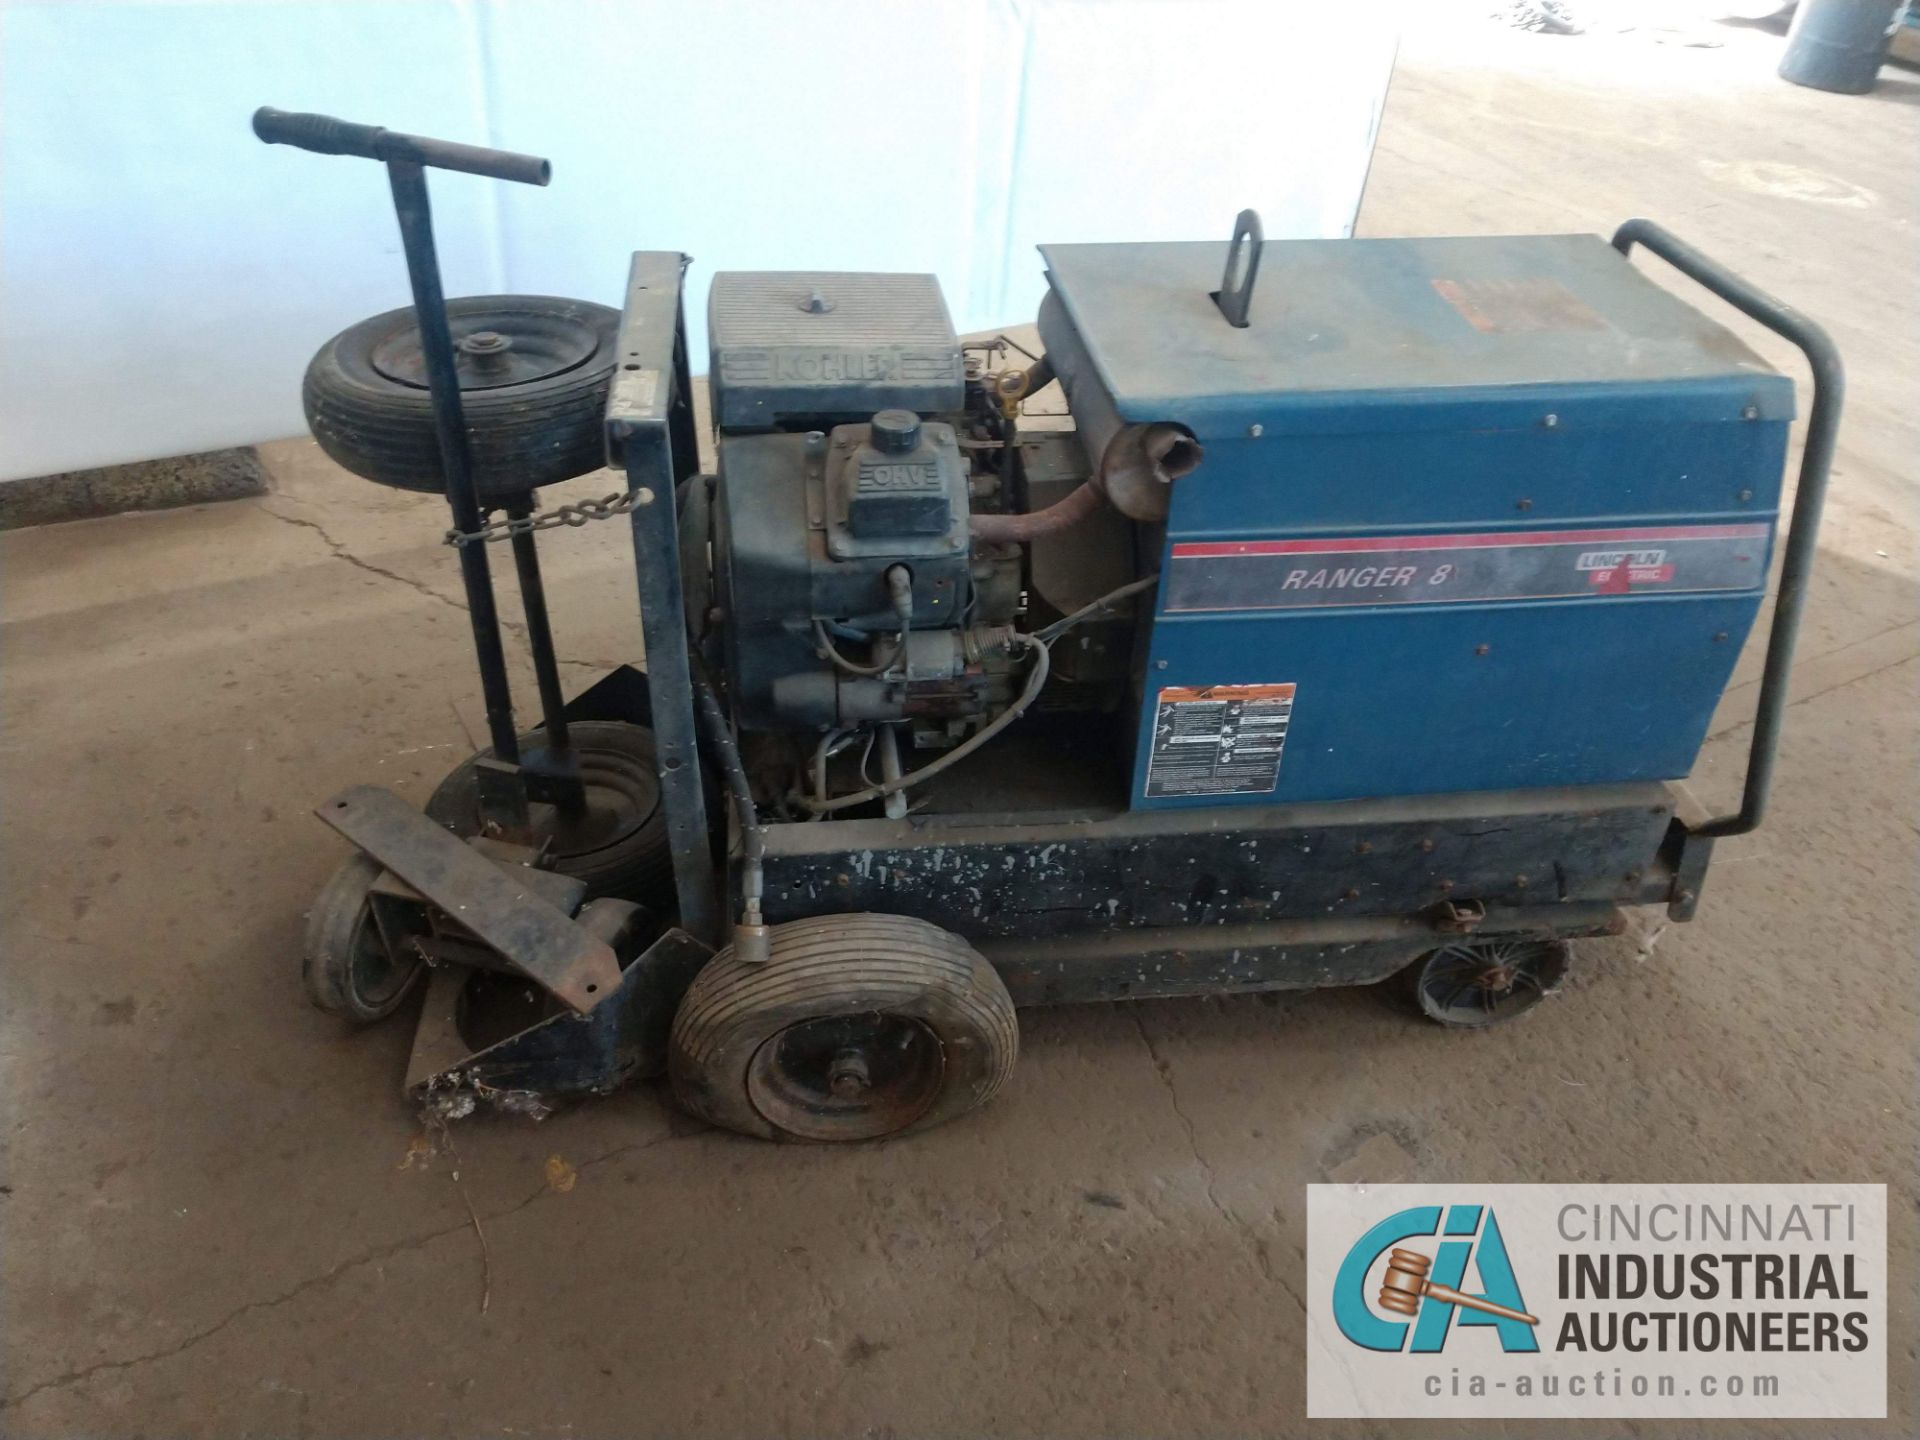 LINCOLN MODEL RANGER 8 WELDER GENERATOR - $20.00 Rigging Fee Due to Onsite Rigger - Located in